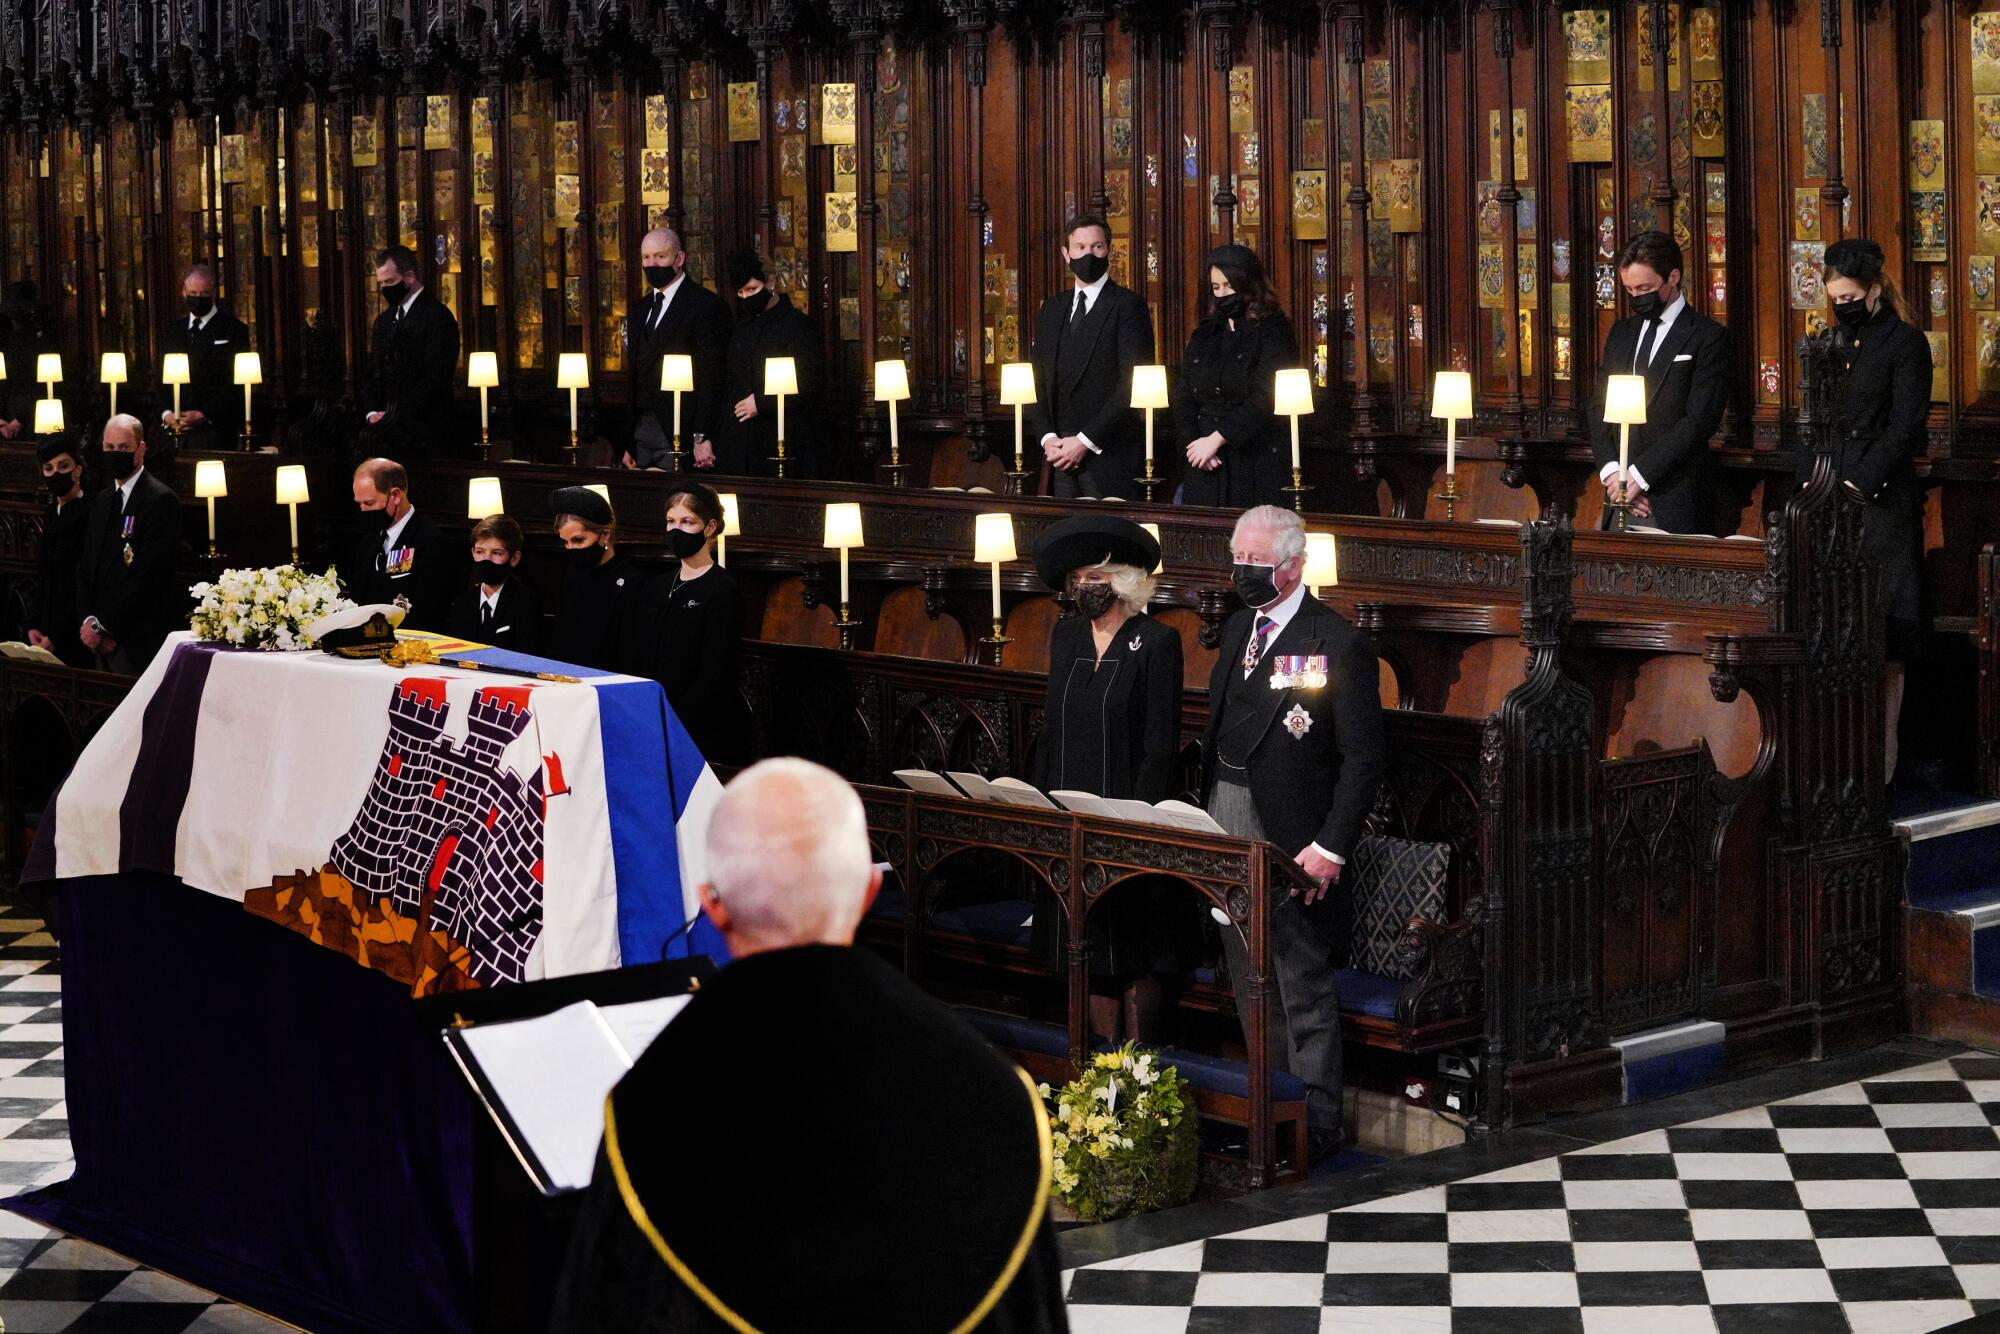 Royal family members are spaced apart in small groups in St. George's Chapel near Prince Philip's coffin.